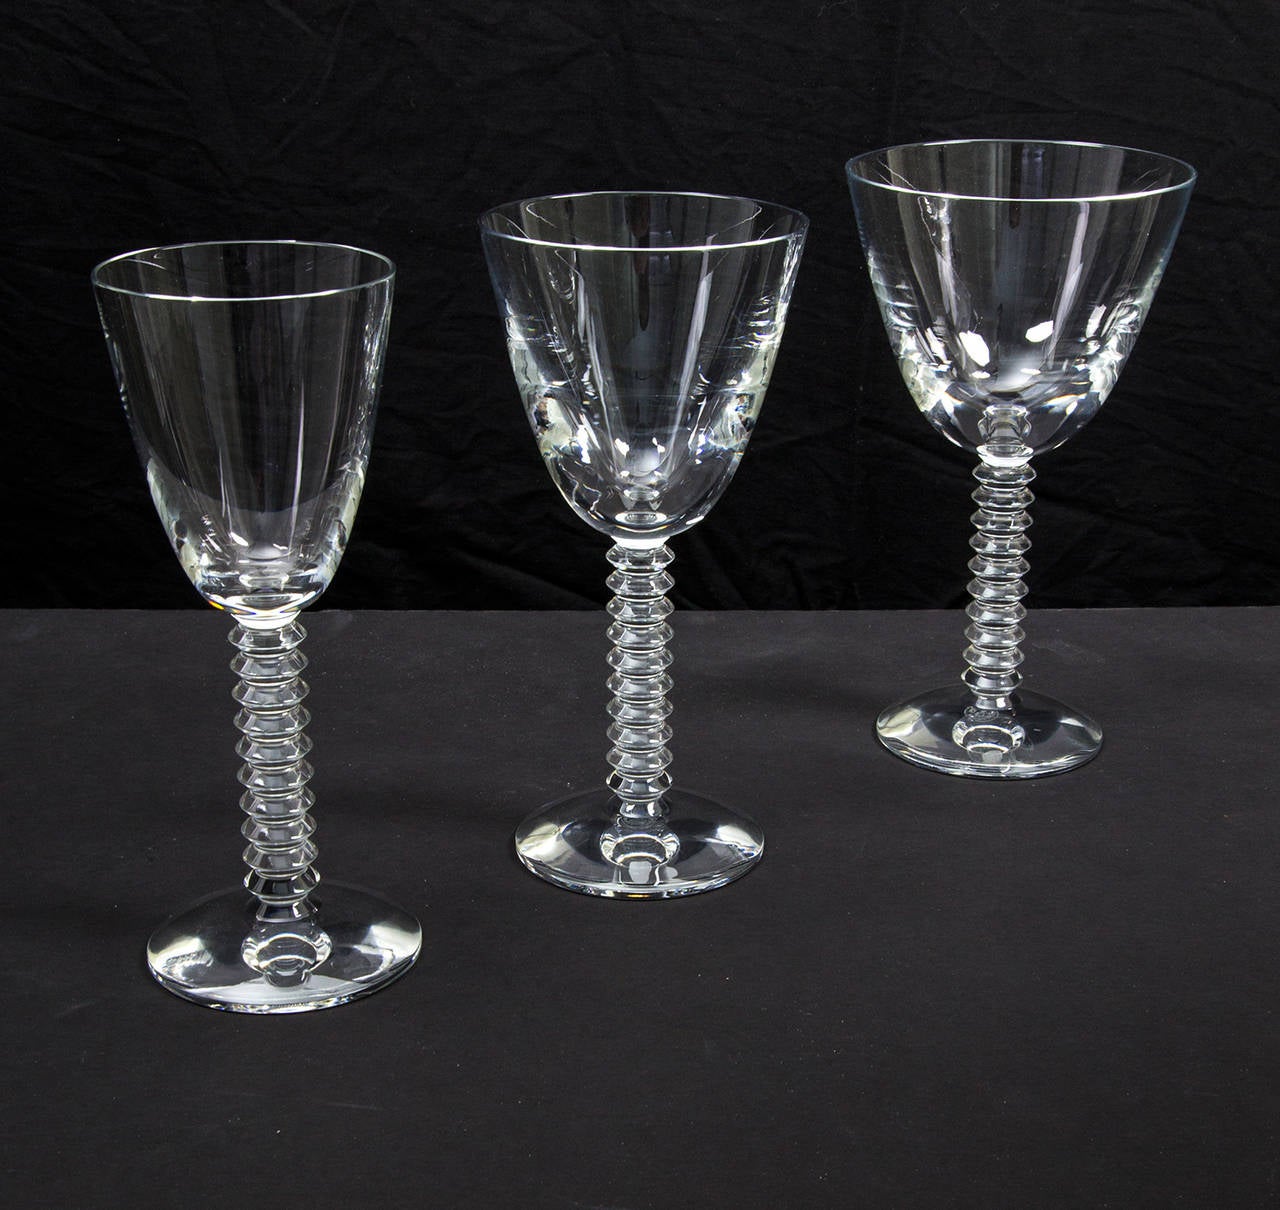 Exquisite set of 36 crystal glasses by Baccarat in the Lalande pattern, comprising 12 crystal tall water goblets, 12 crystal white wine glasses and 12 crystal red wine glasses. Each glass measures approximately: 7.5” tall. Classic and timeless!